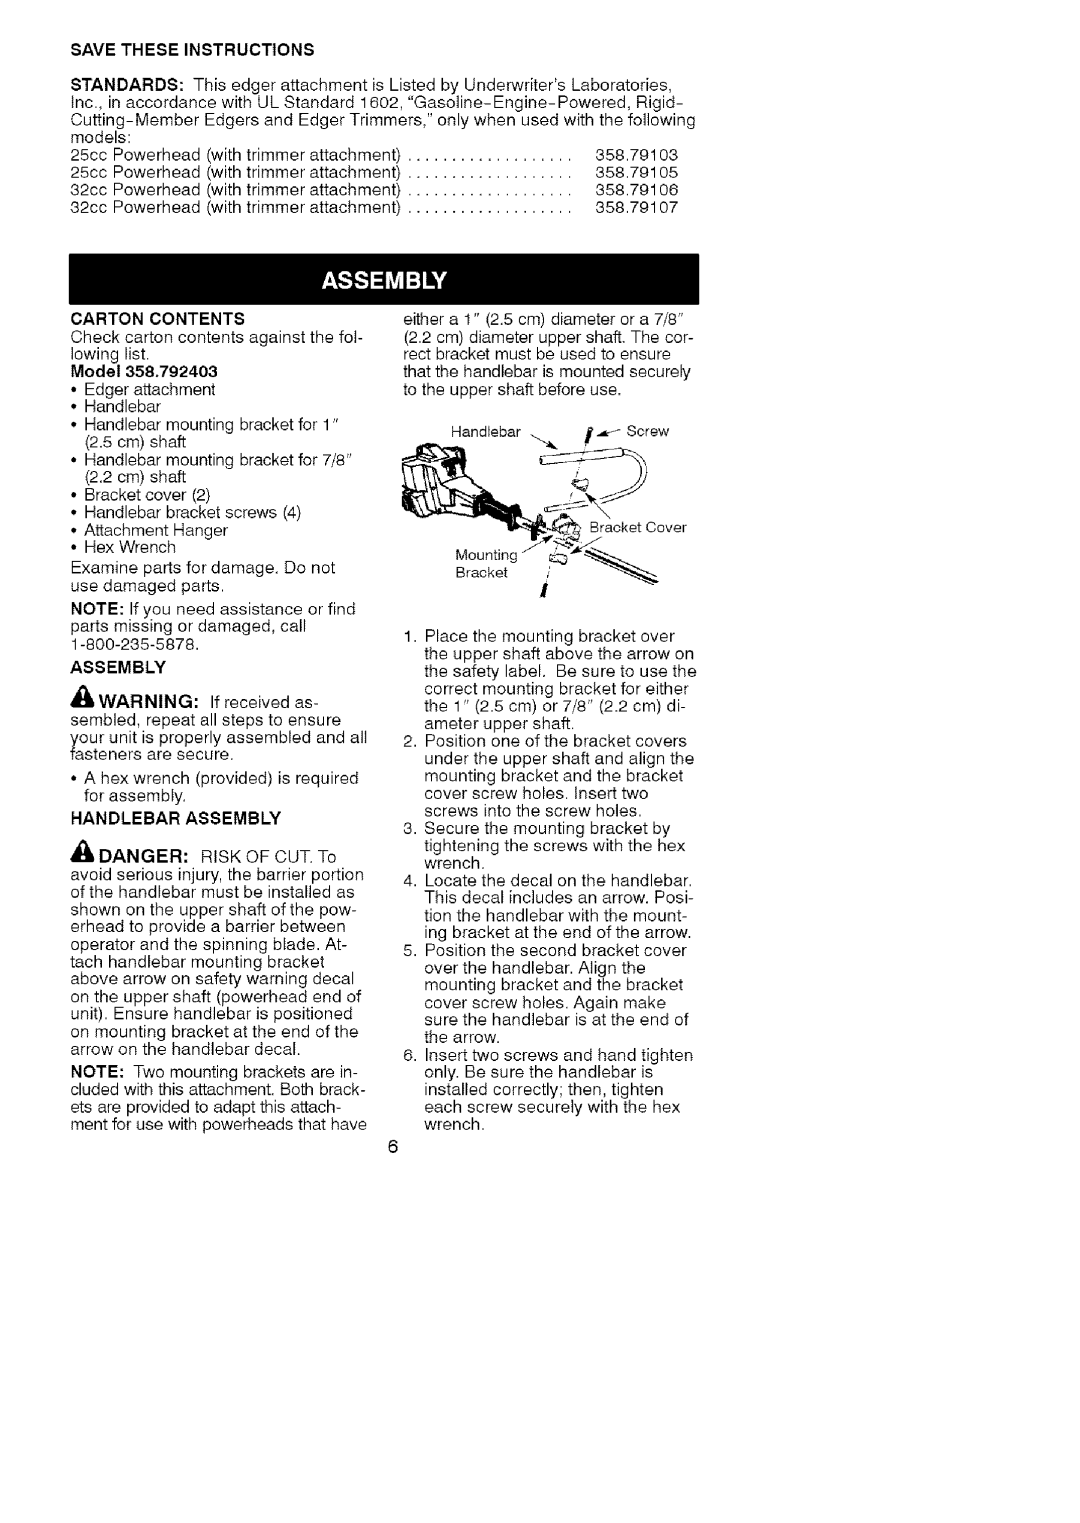 Craftsman 358.792403 manual Save These Instructions, Handlebar Assembly 